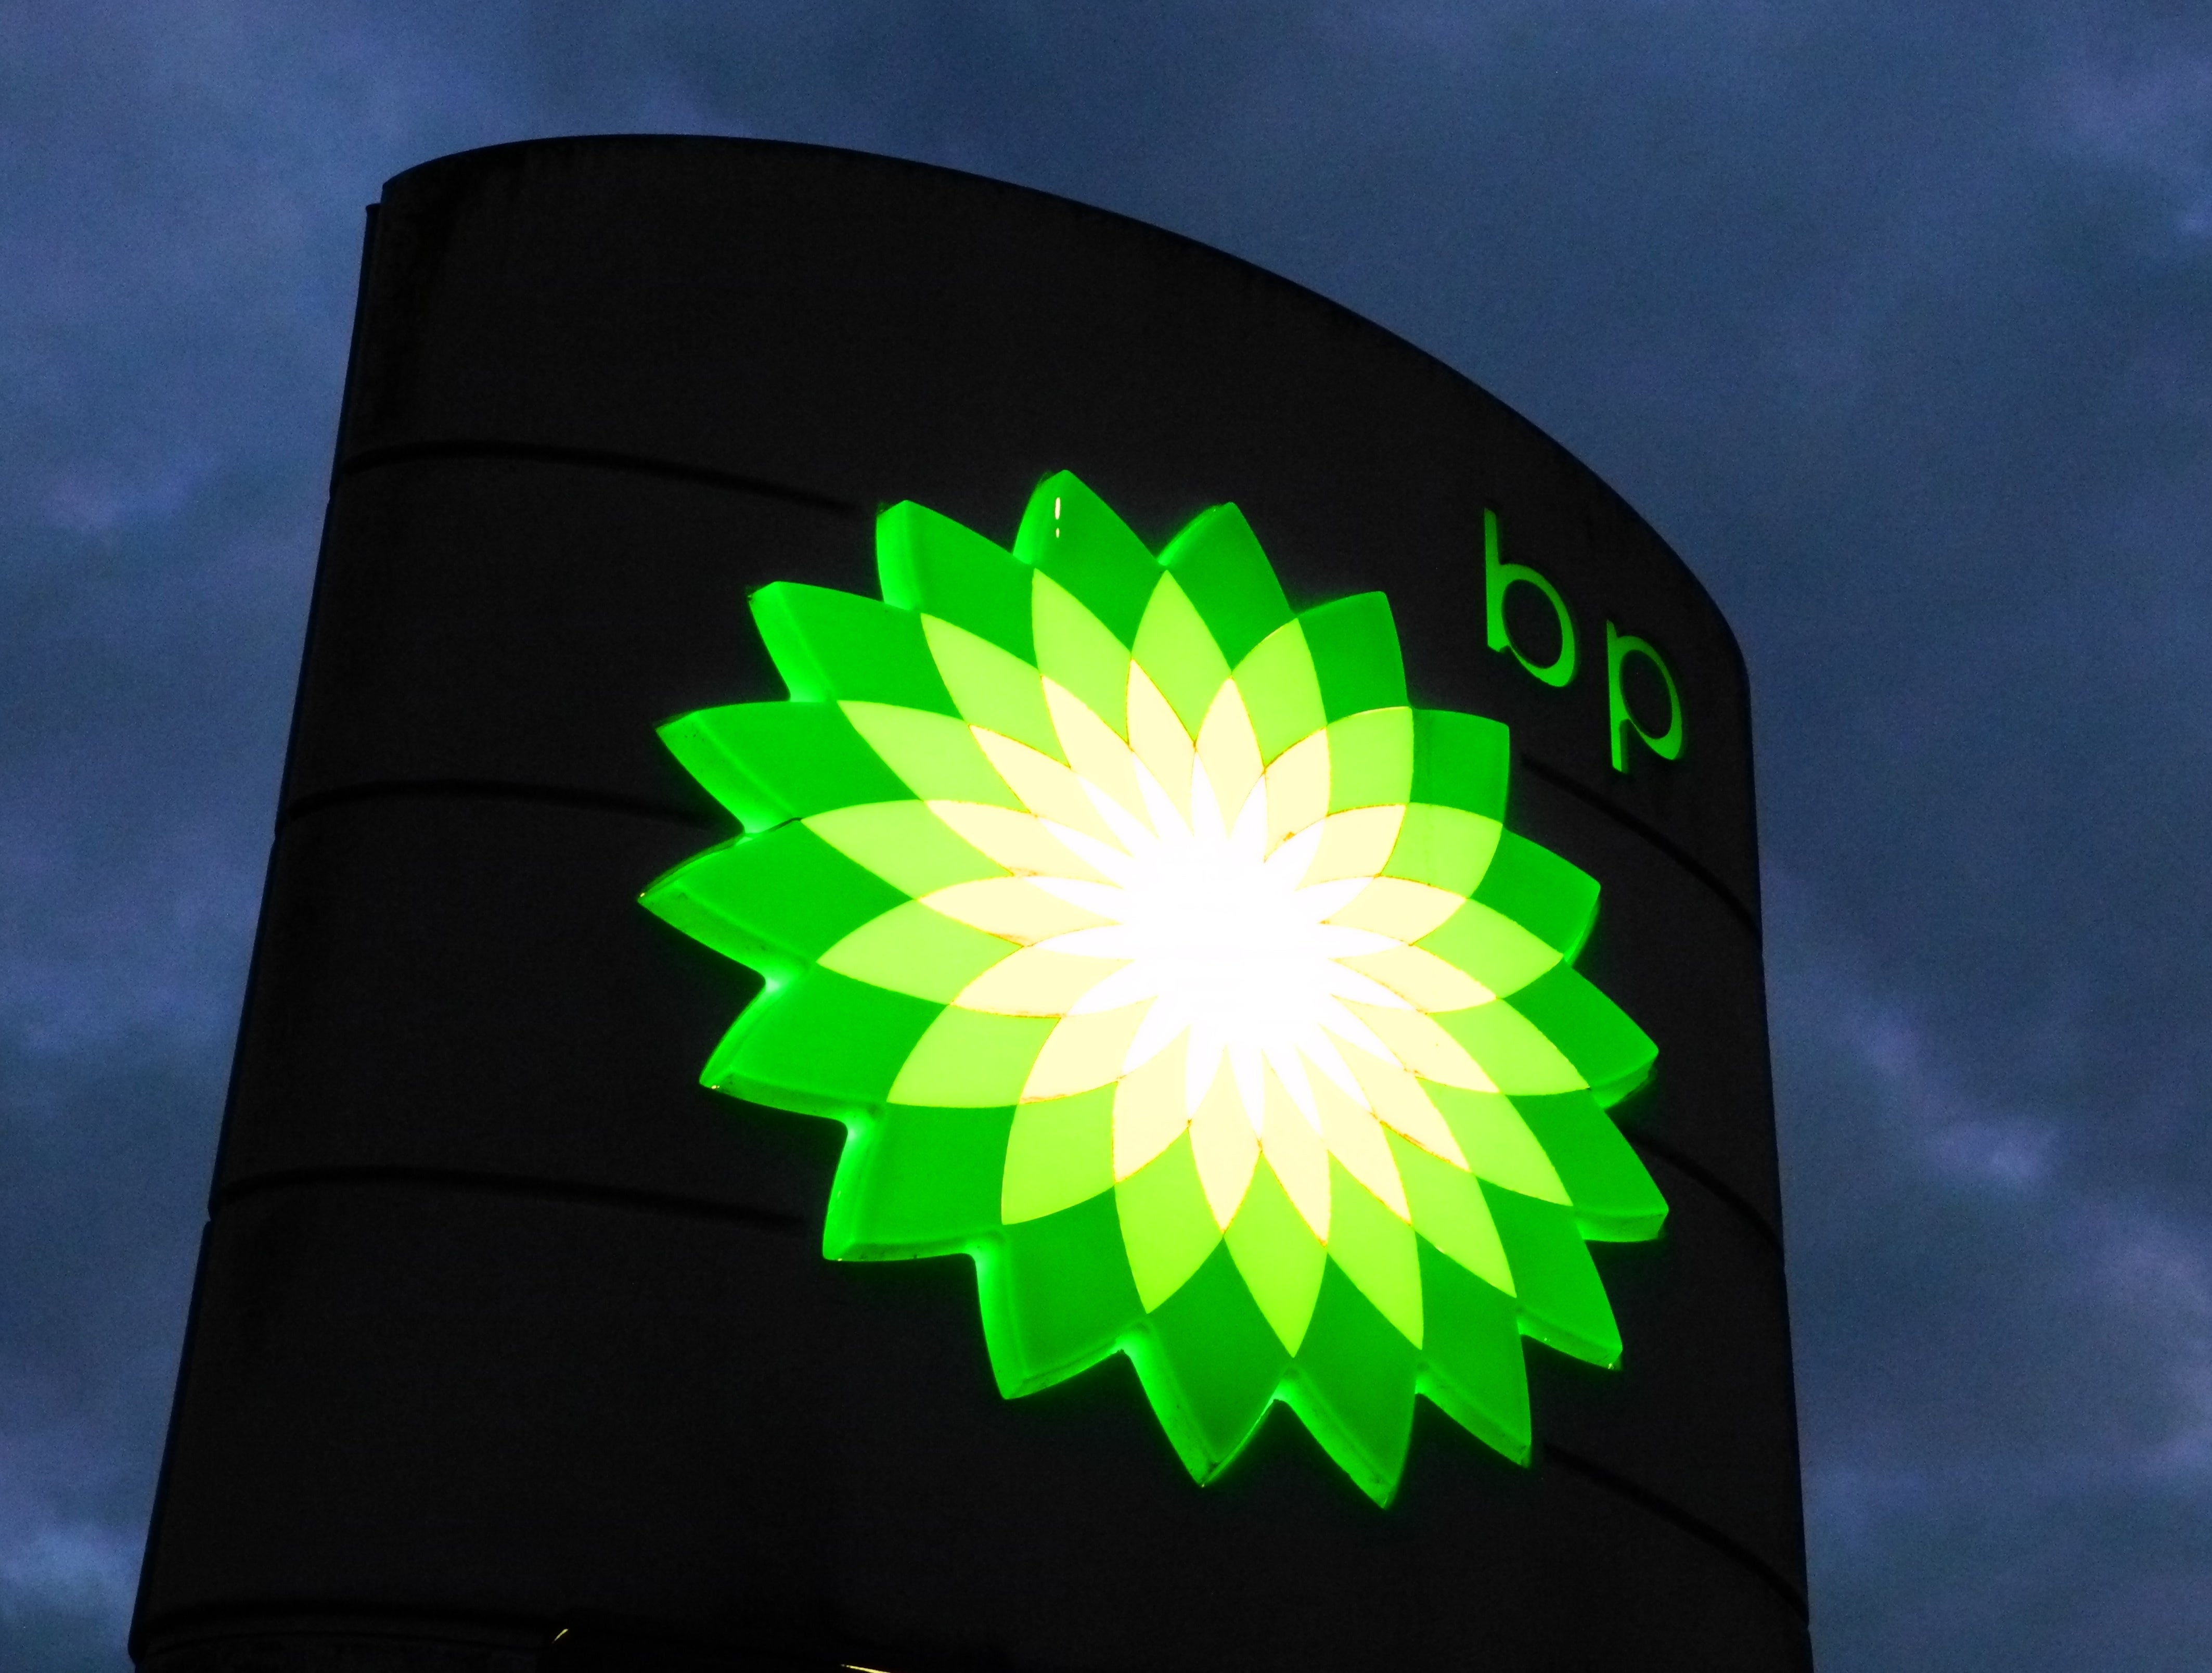 BP: lighting up the City with windfall profits